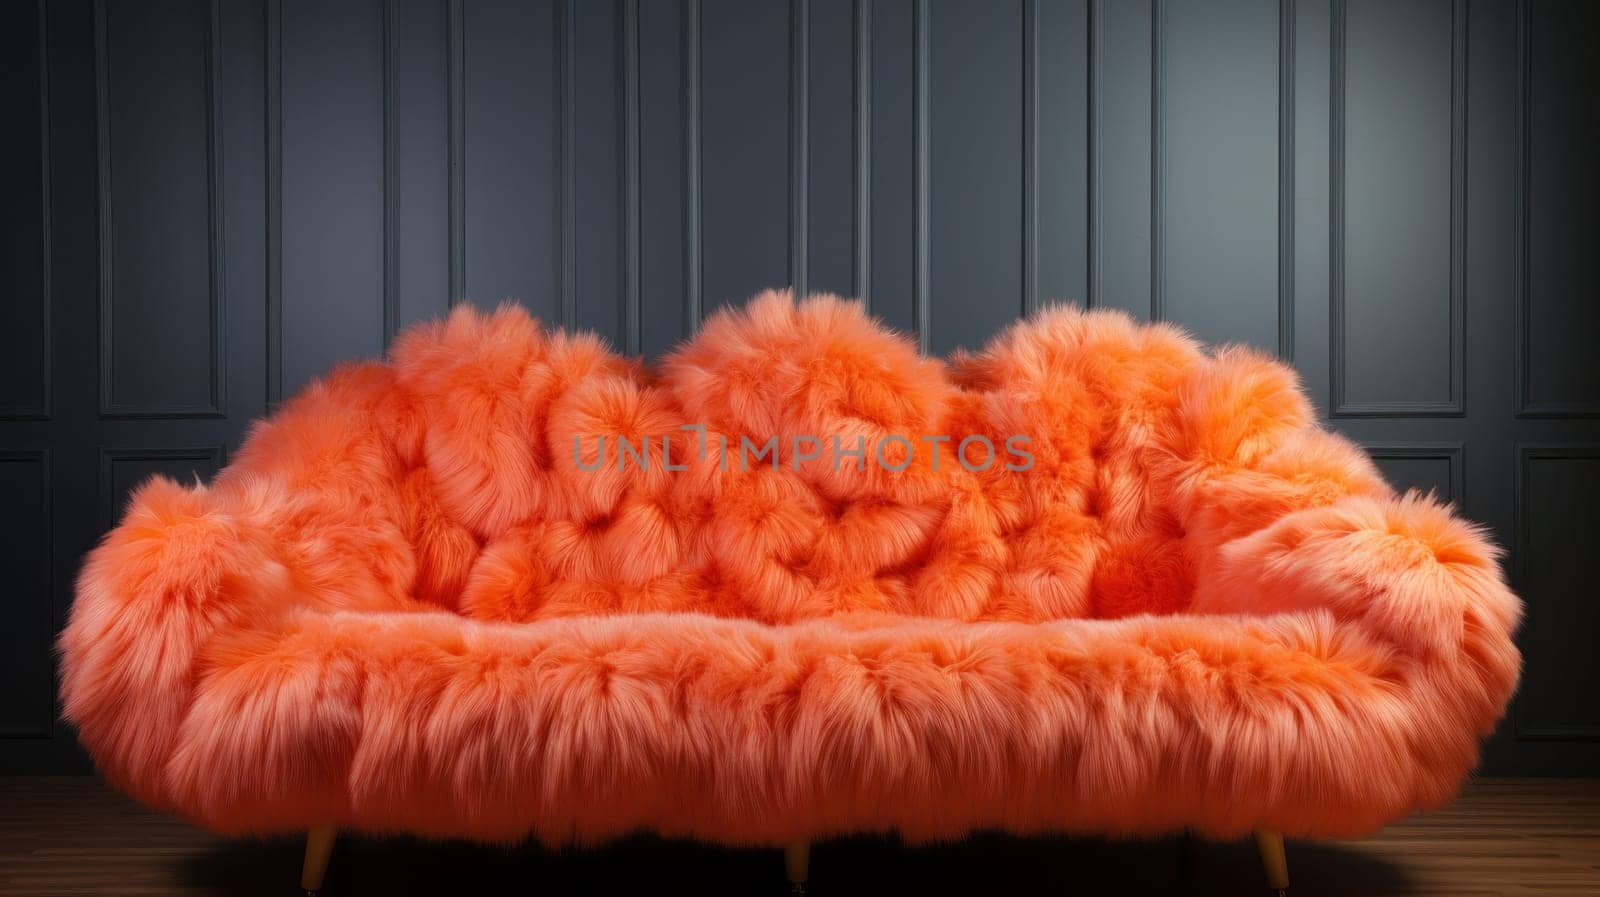 A fuzzy orange couch sitting on a wooden floor in front of a dark wall